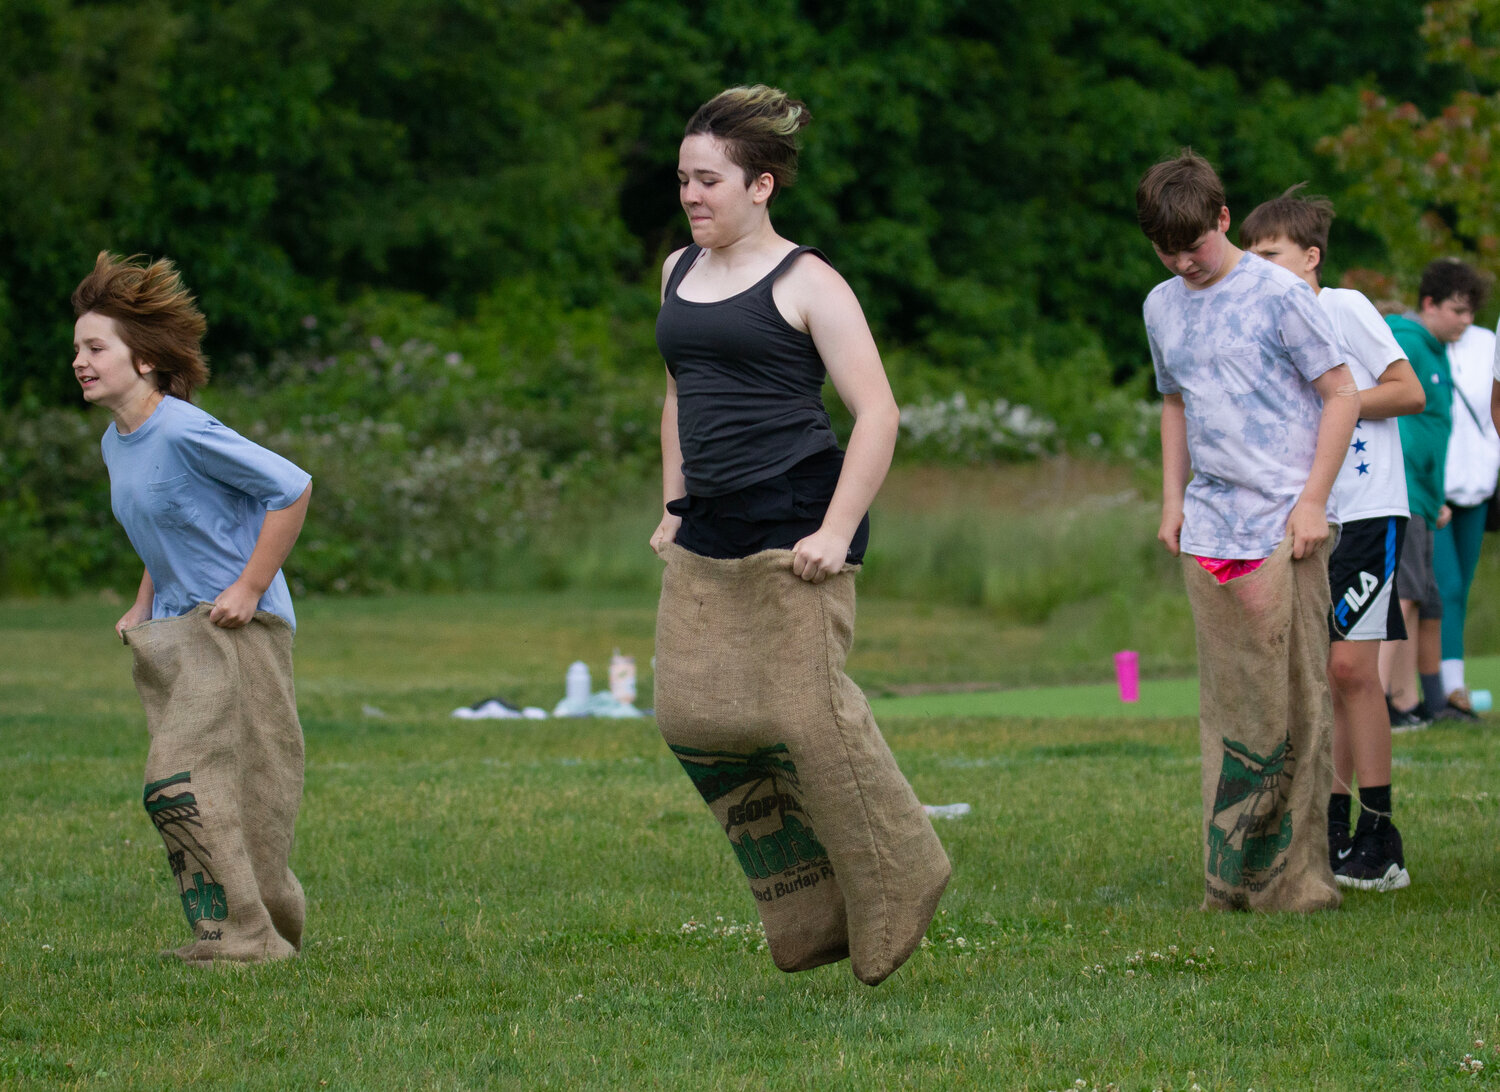 Olivia Clare (middle) competes in the sack race during Field Day at Barrington Middle School.